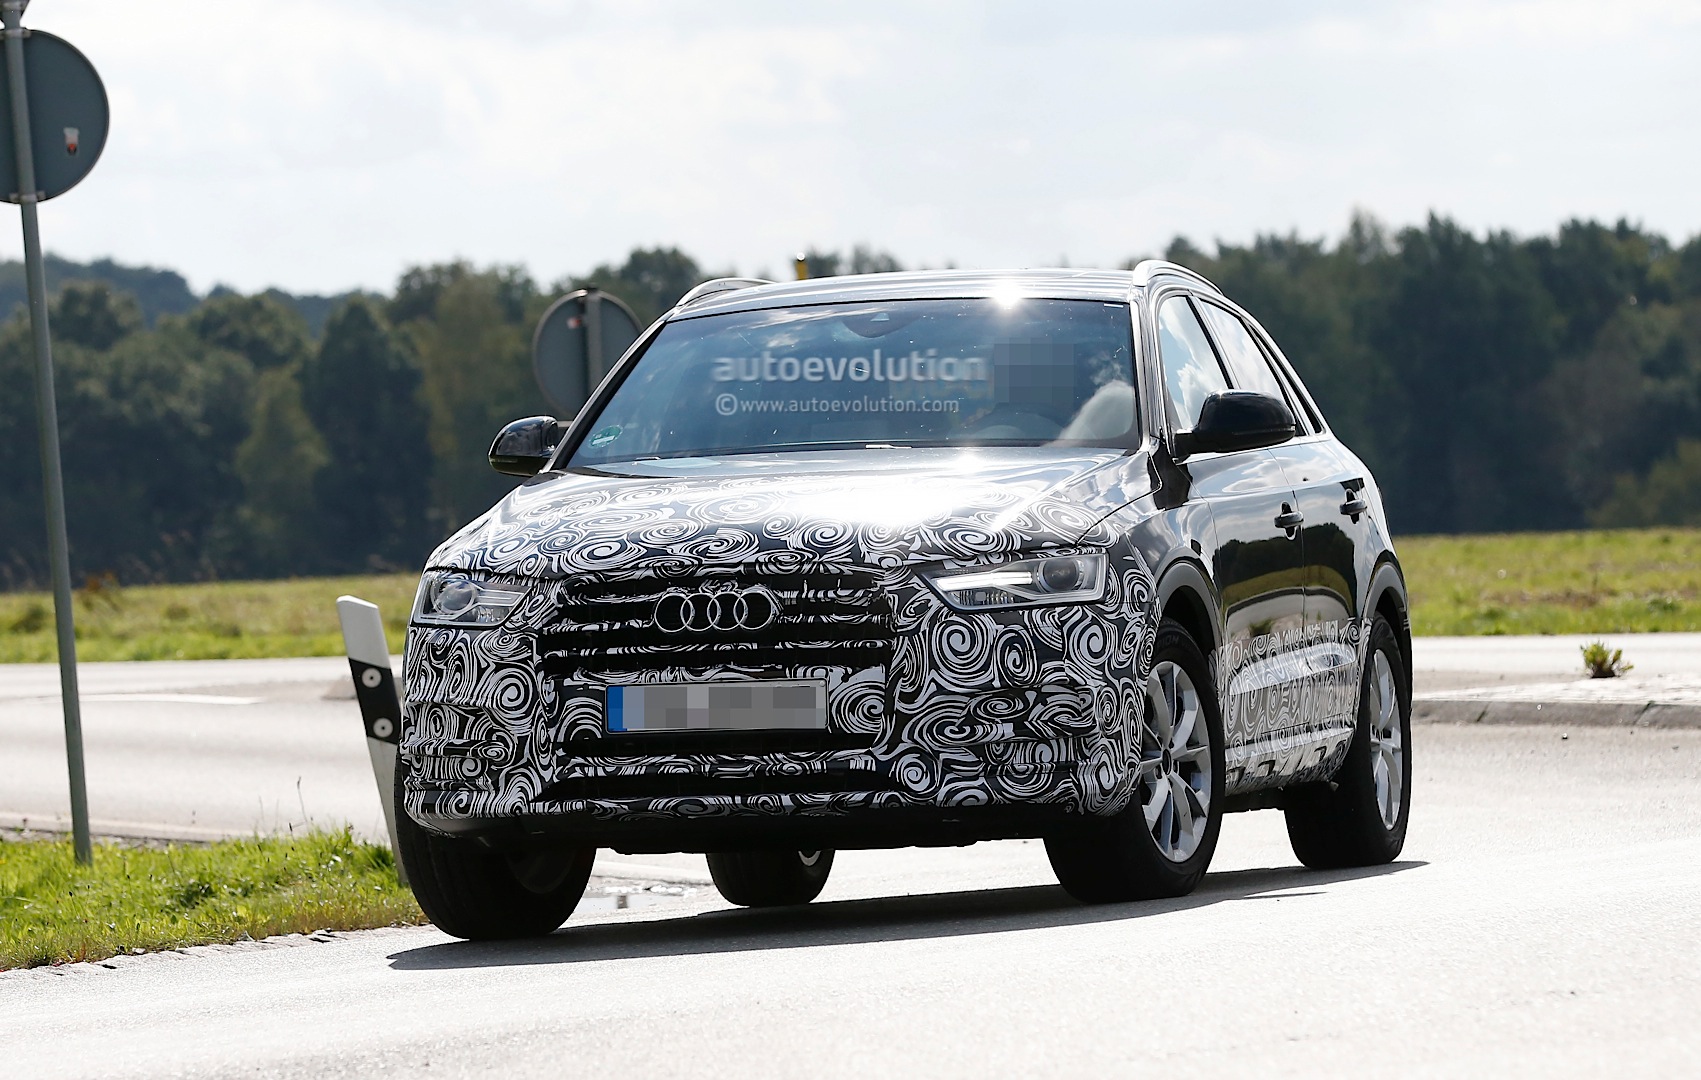 Audi Q3 Facelift Prototype Fully Reveals Headlights and Taillights